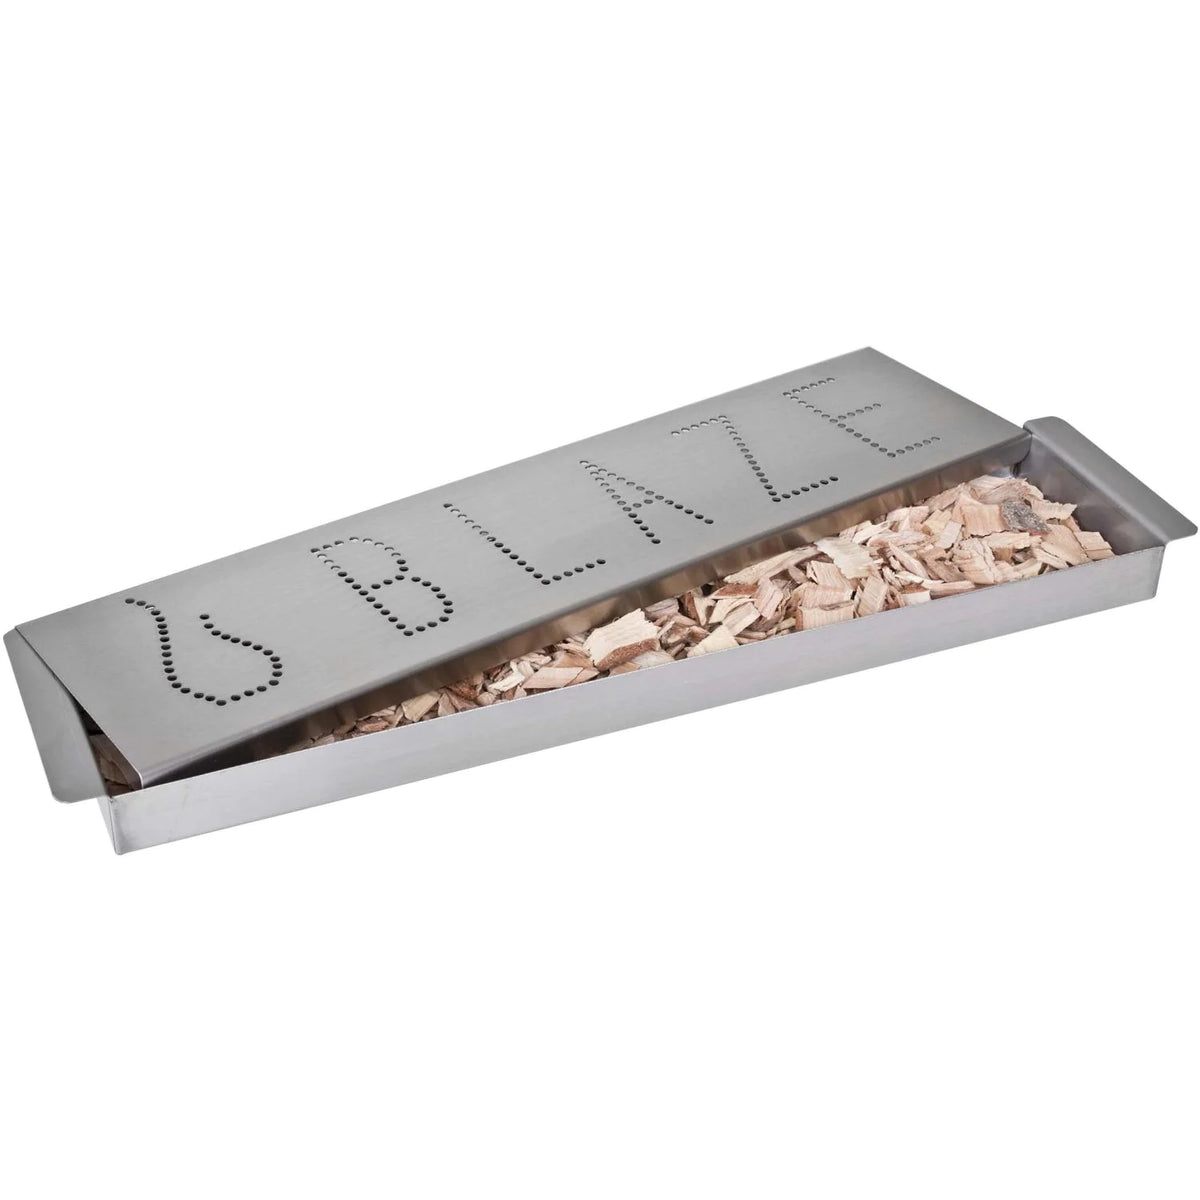 Blaze Stainless Steel Smoker Box With Wood Chips